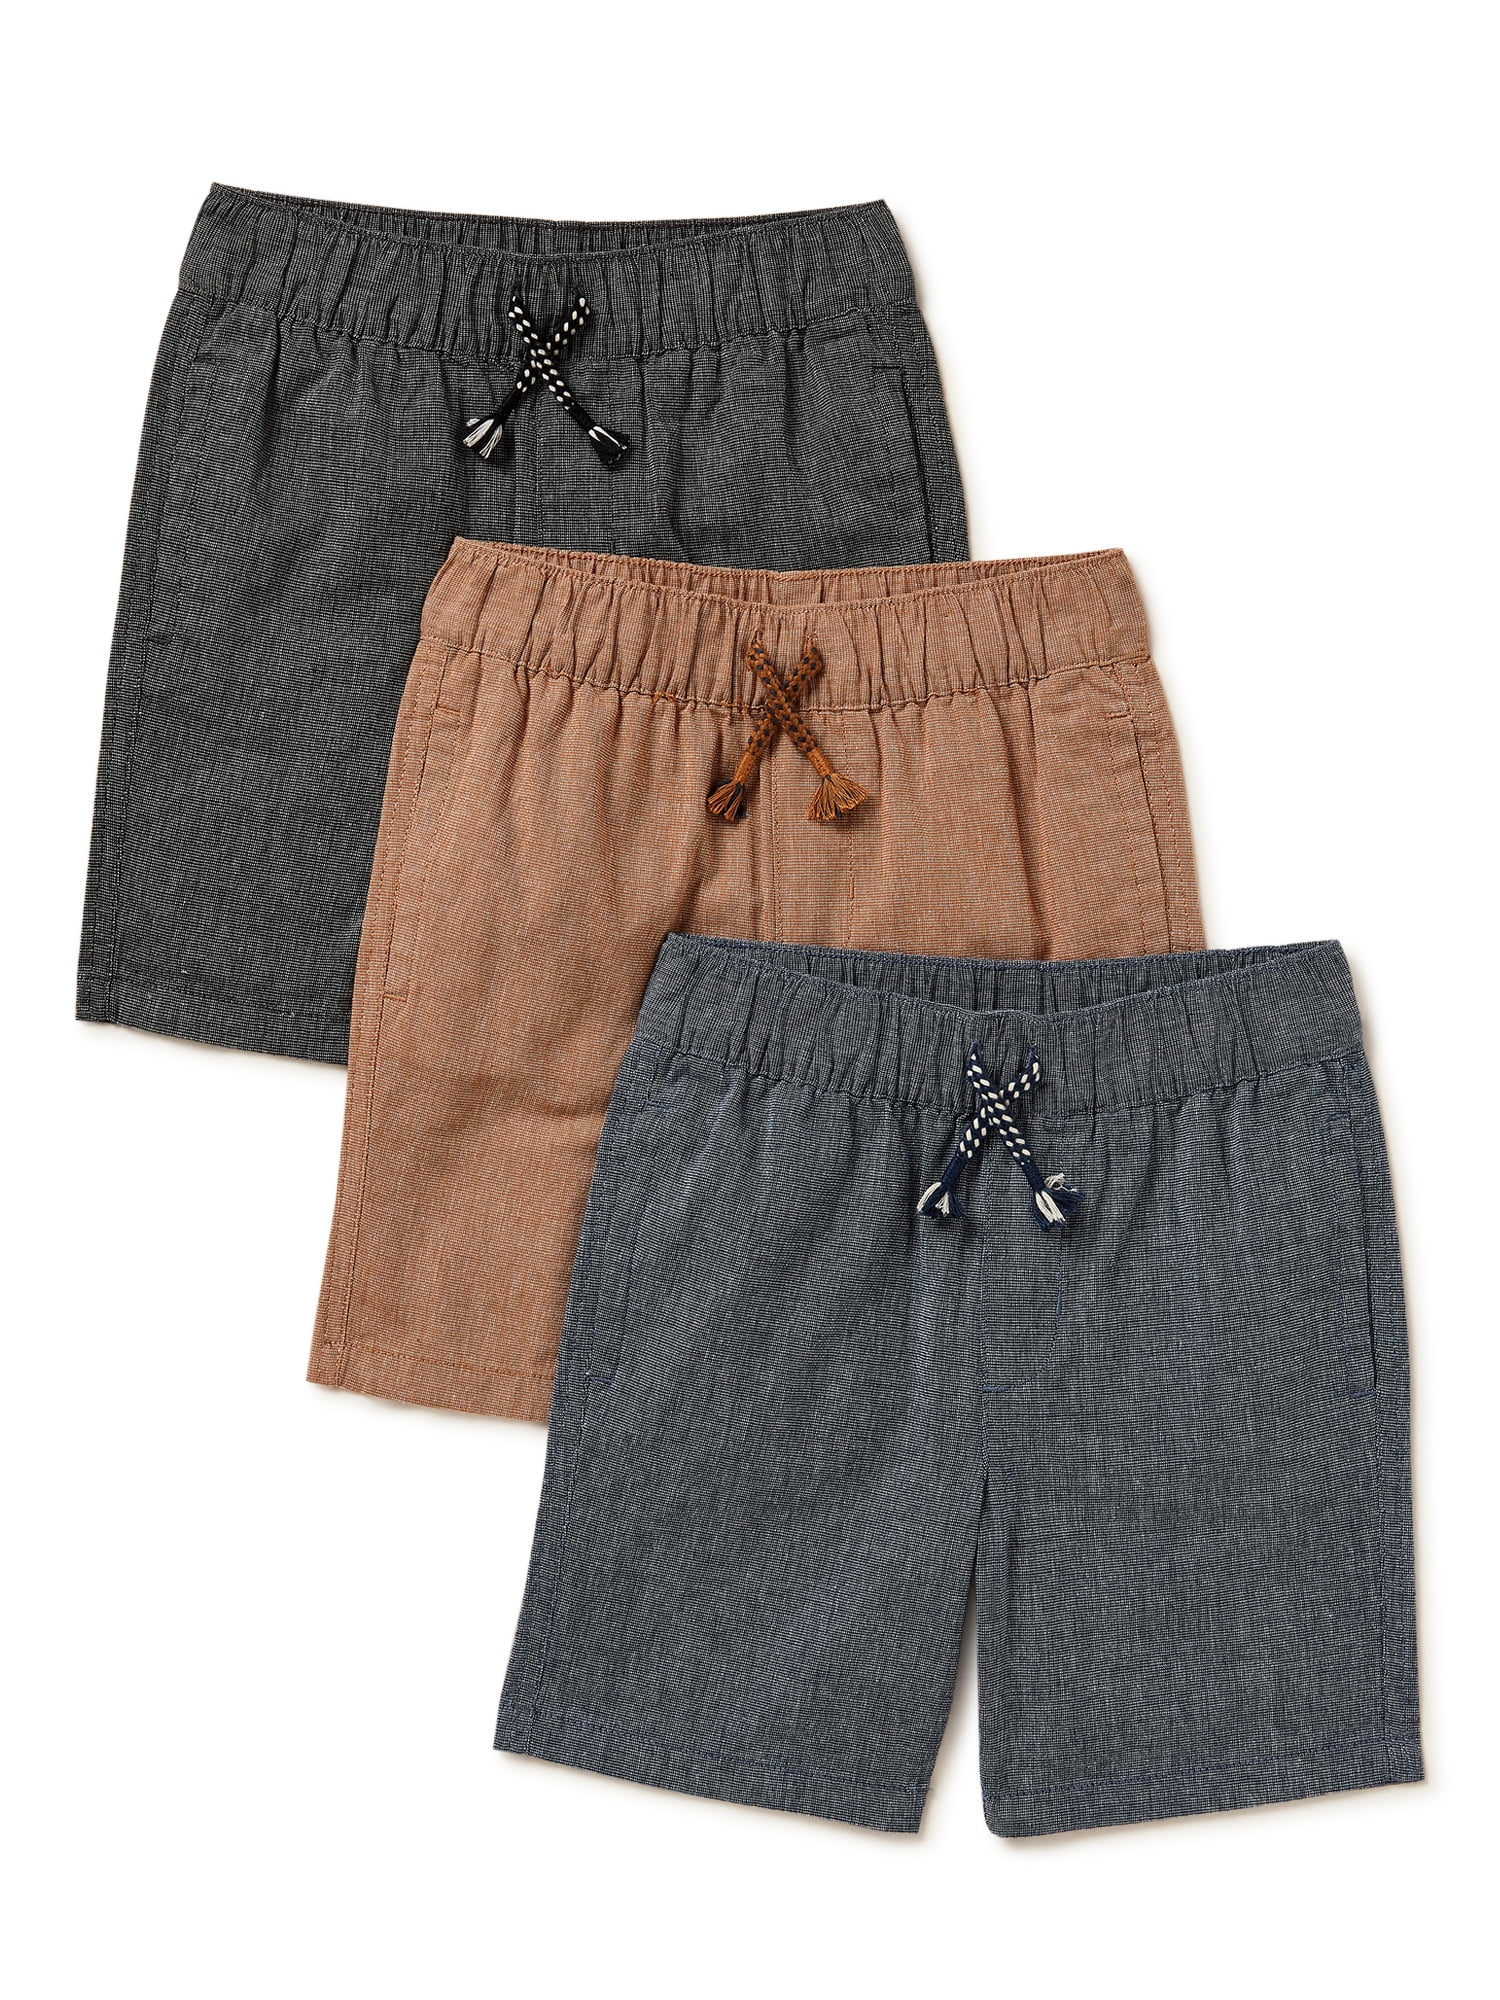 Bafeicao Baby Shorts 2-Pack Toddler Boys Summer Casual Cotton Short Pants 